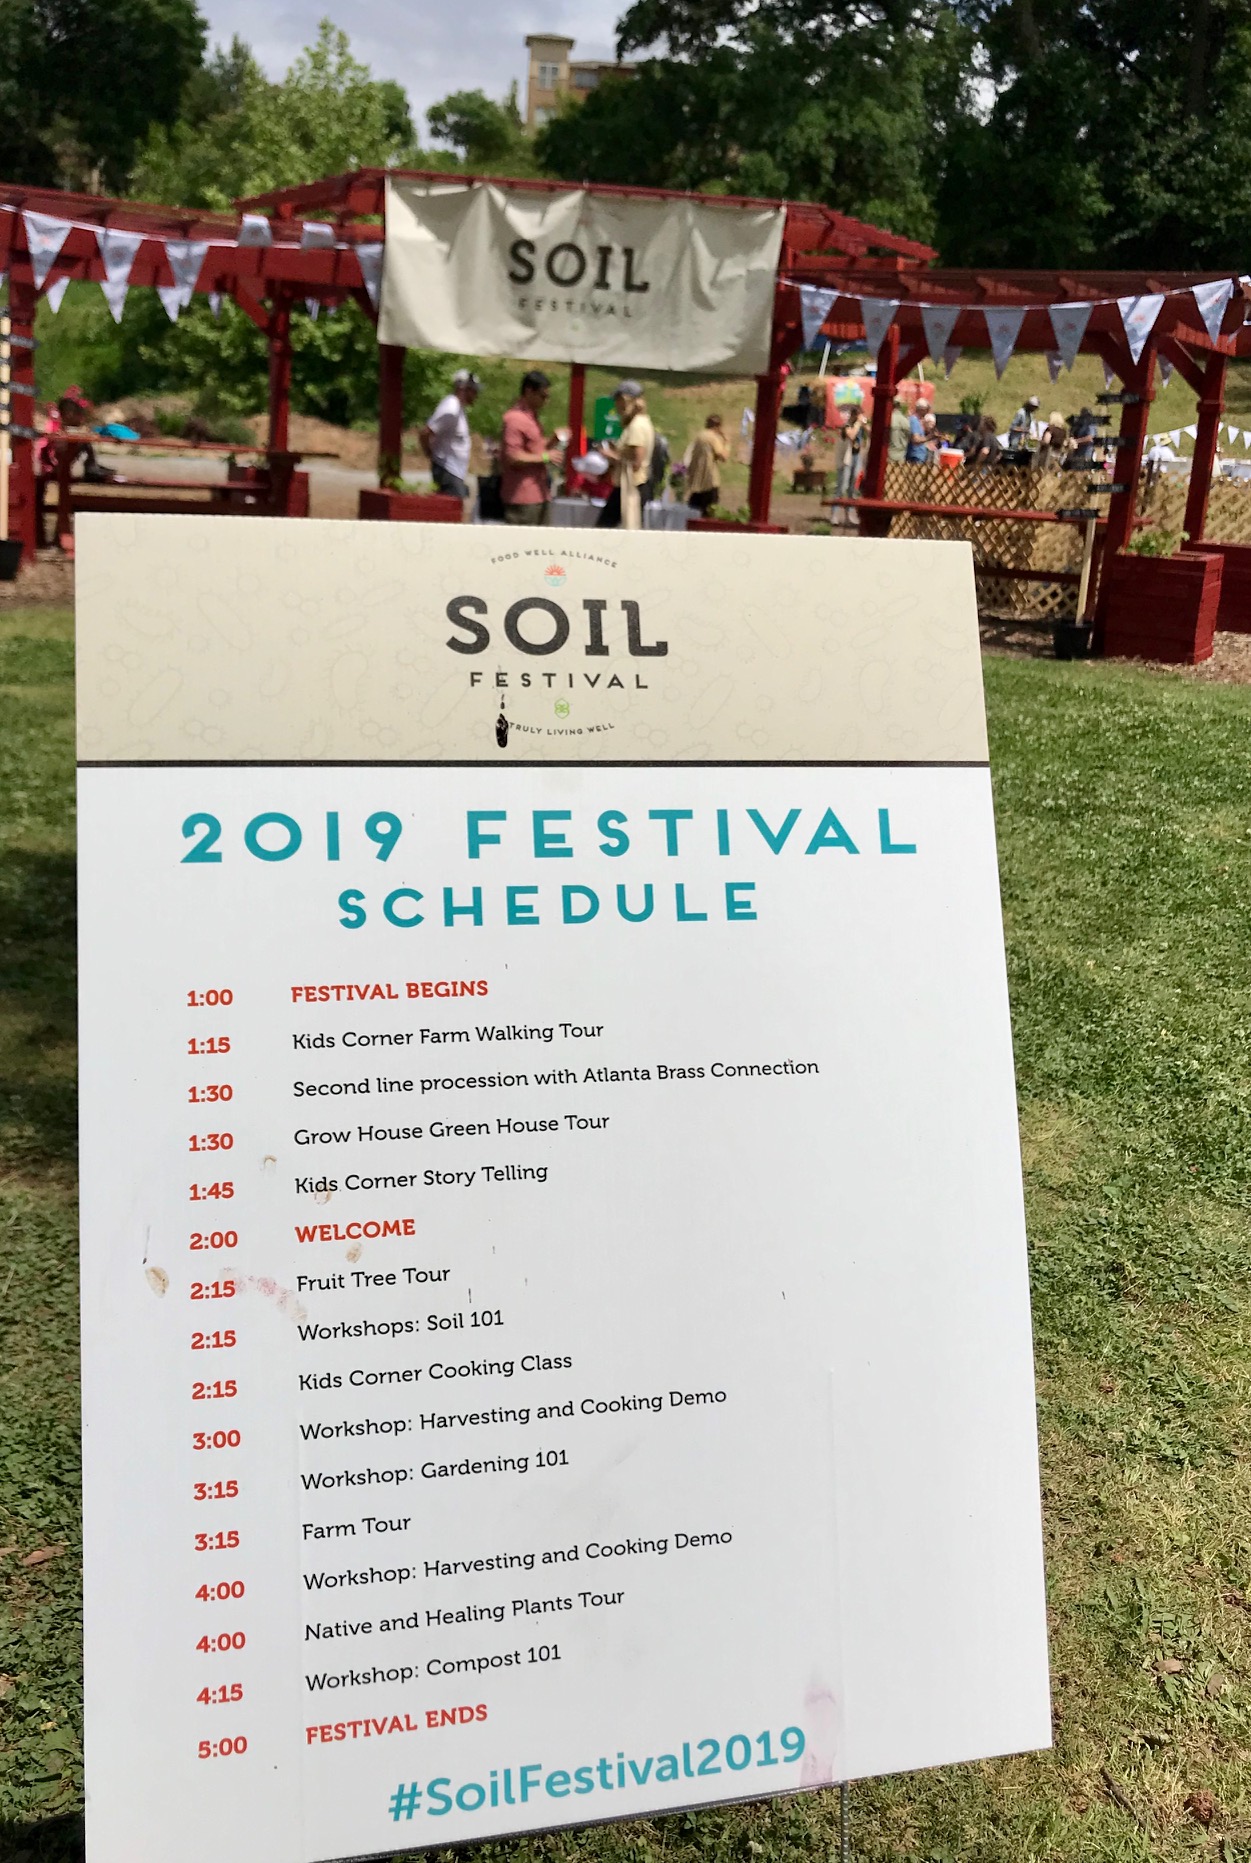 Food Well Alliance Soil Festival at Truly Living Well 2019 by Kelly Jordan